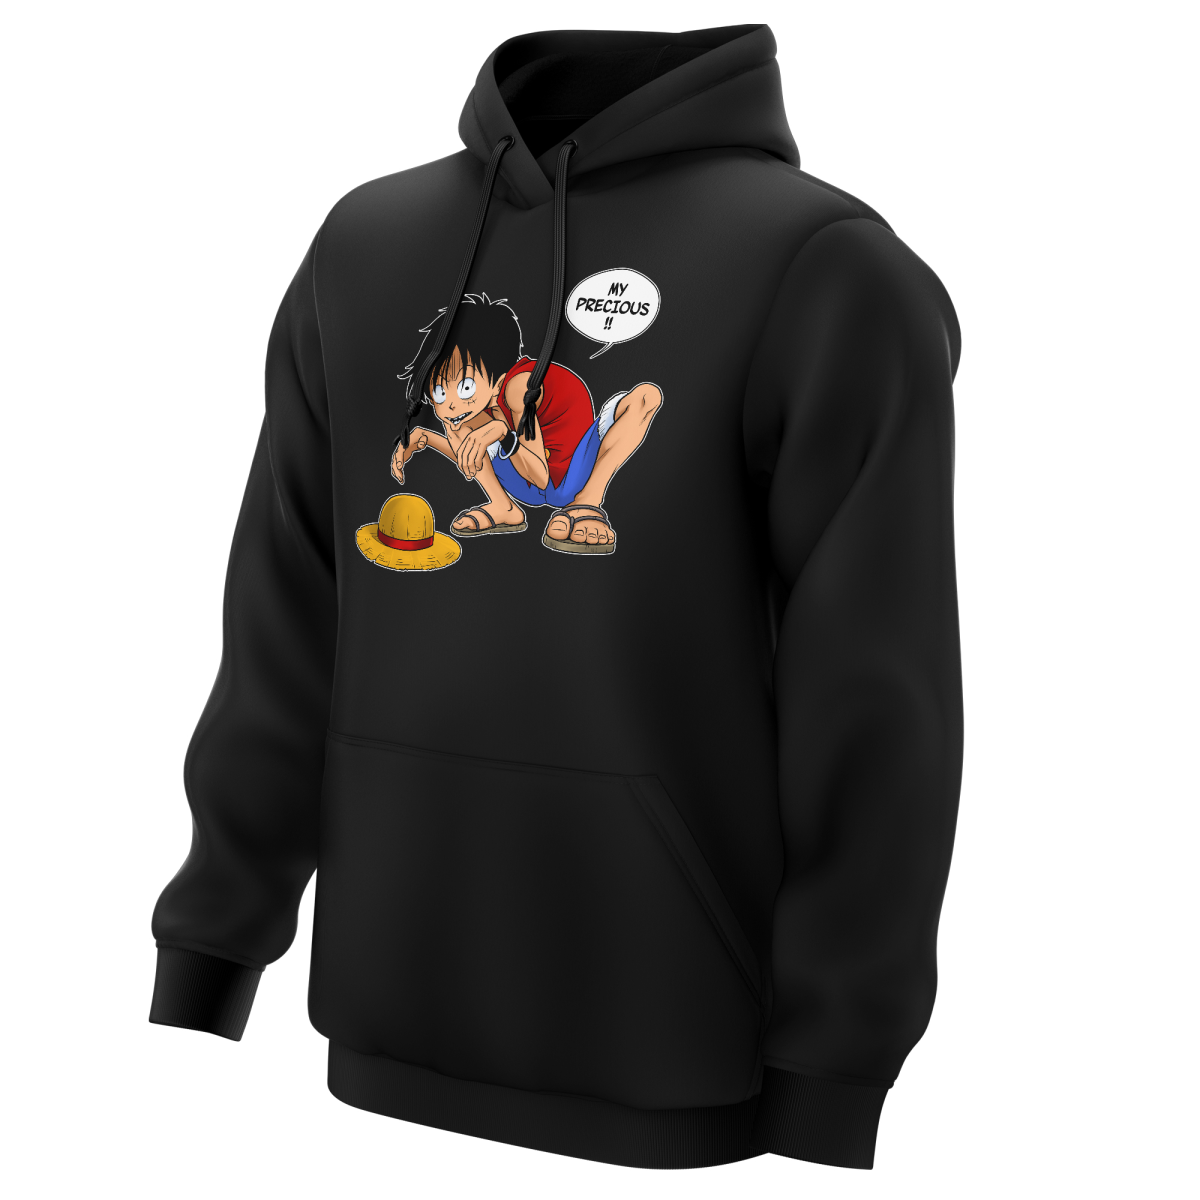 Funny One Piece The Lord Of The Rings Hoodie Monkey D Luffy And Gollum One Piece The Lord Of The Rings Parody Ref 744